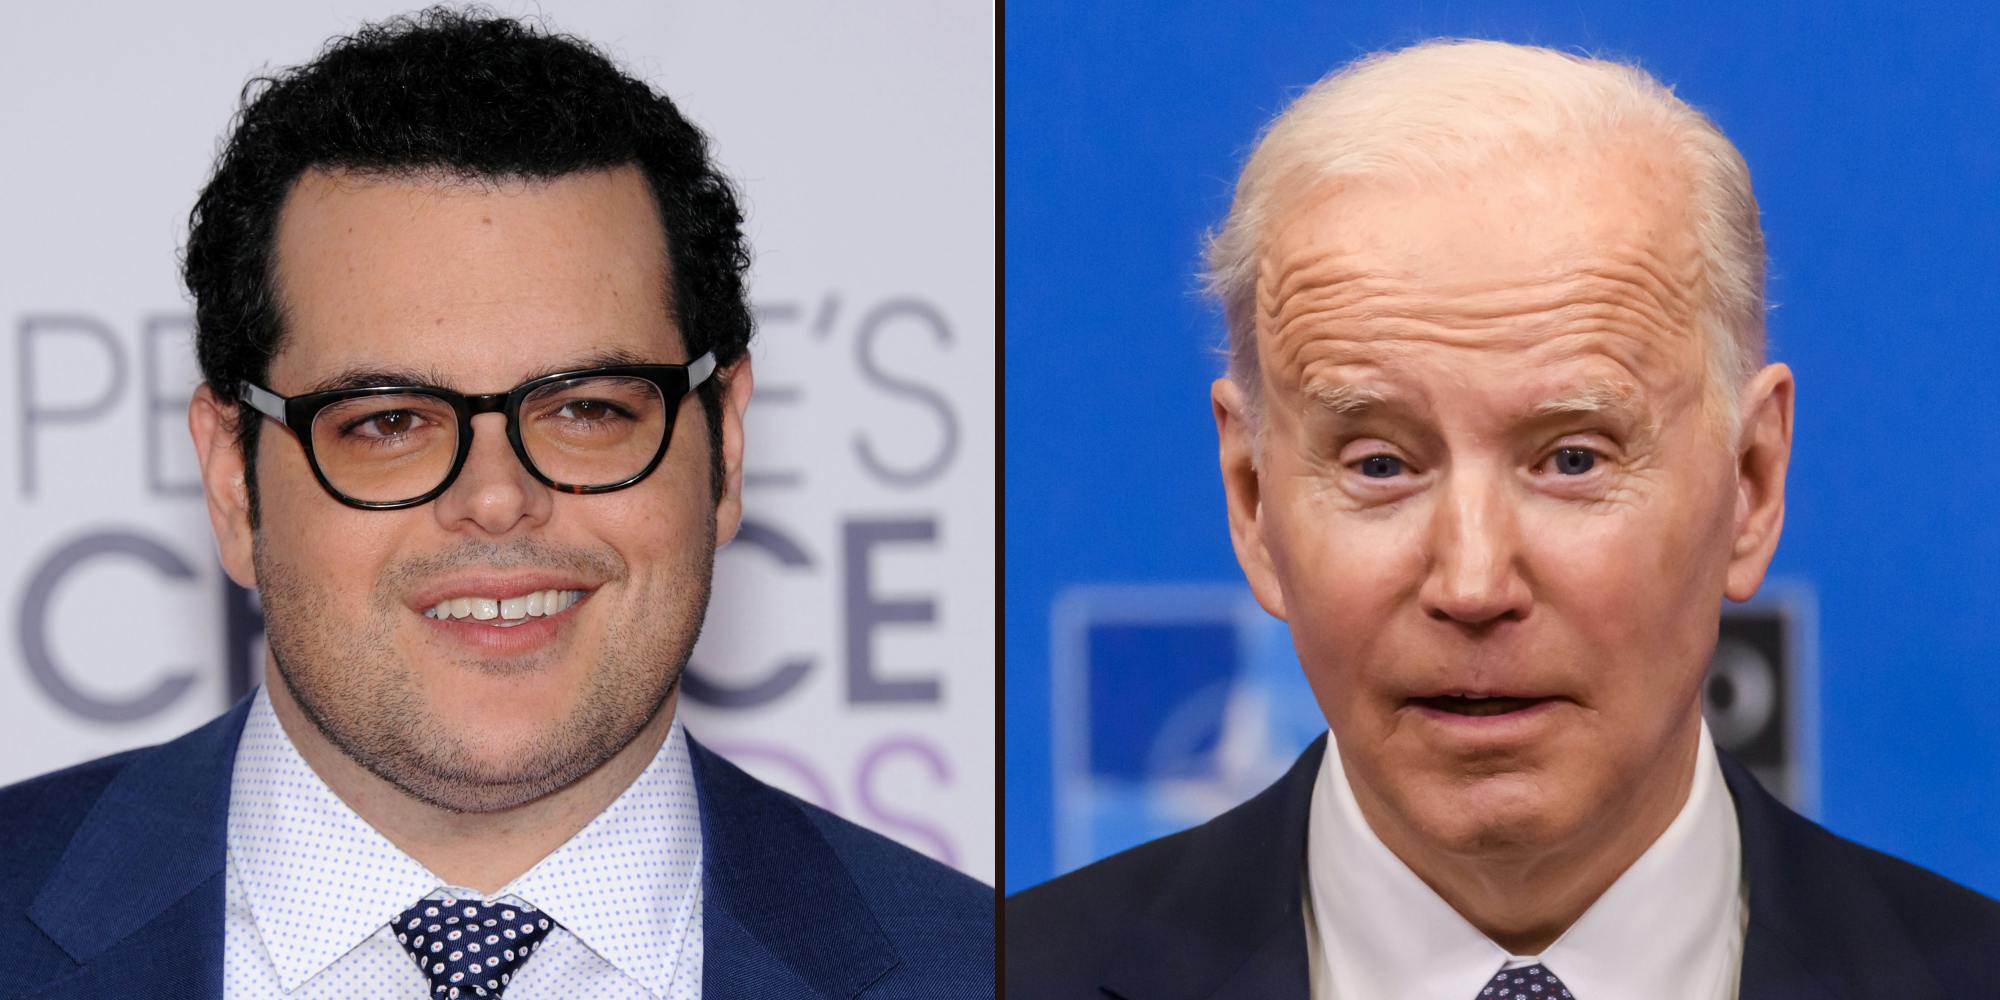 ‘A Democrat has been president for 3 of the last 4 terms’: Josh Gad says ‘register to vote’ amid Roe v. Wade leak